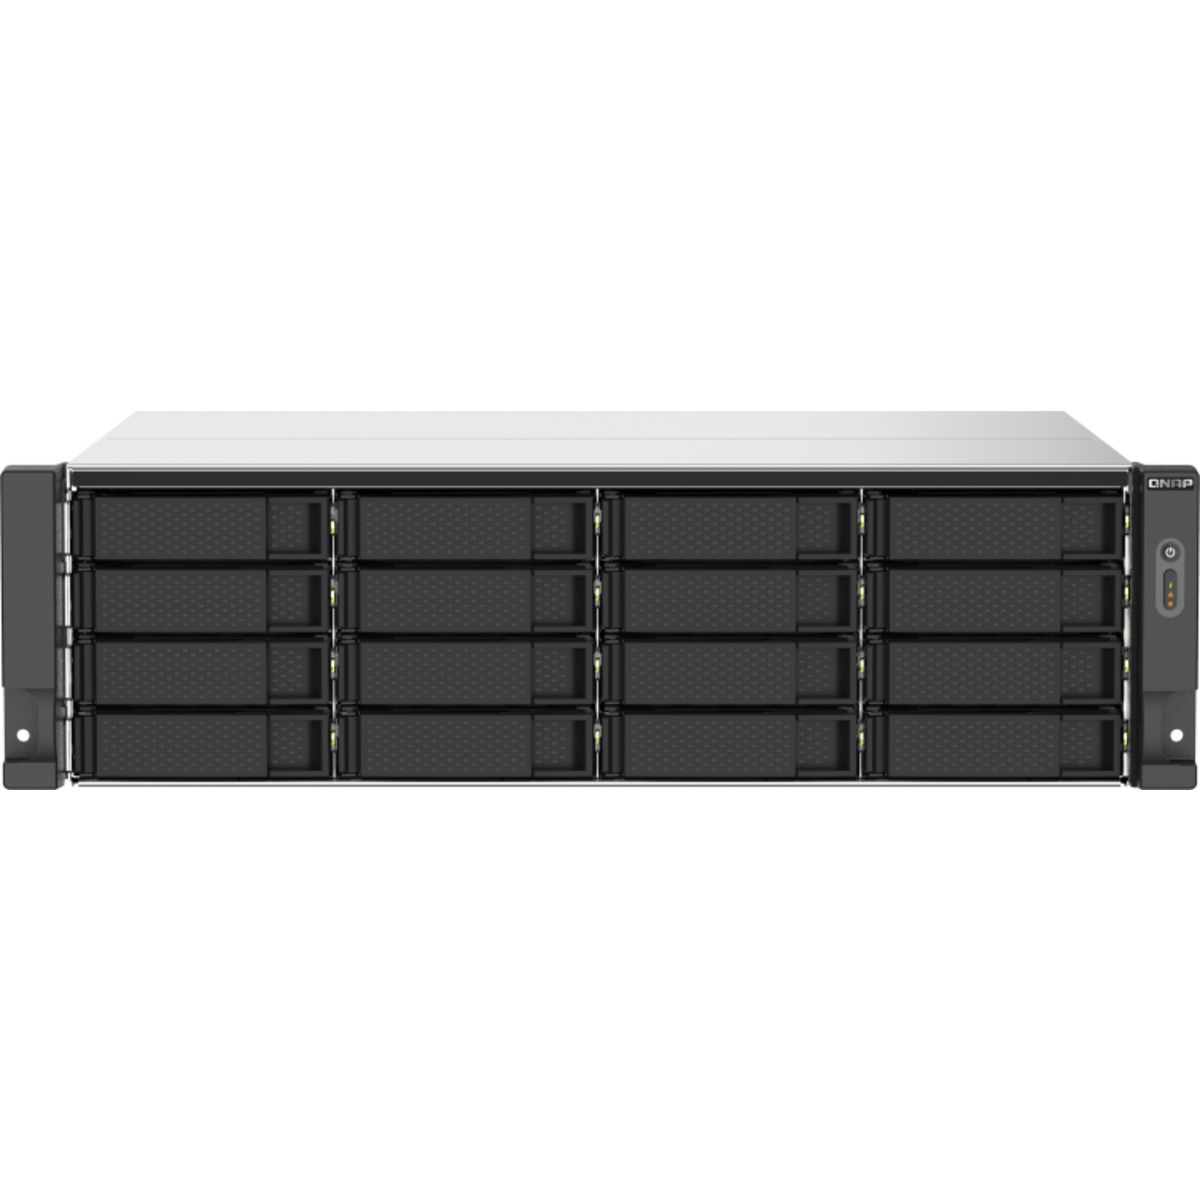 QNAP TS-1673AU-RP 256tb 16-Bay RackMount Multimedia / Power User / Business NAS - Network Attached Storage Device 16x16tb Toshiba Enterprise Capacity MG08ACA16TE 3.5 7200rpm SATA 6Gb/s HDD ENTERPRISE Class Drives Installed - Burn-In Tested - FREE RAM UPGRADE TS-1673AU-RP